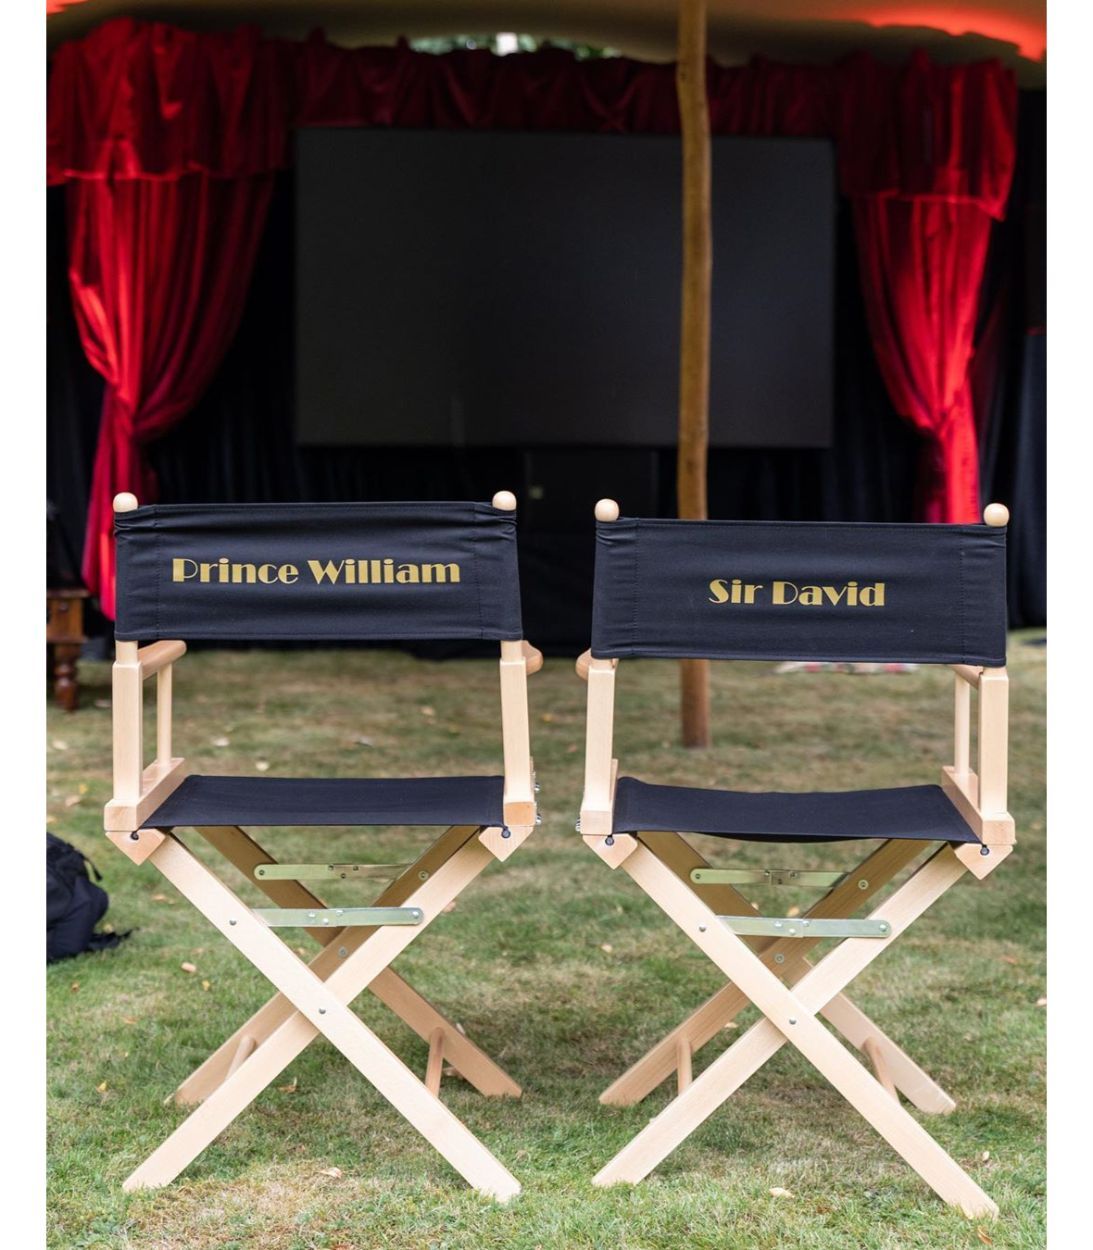 A set of two director chairs for Prince William and David Attenborough